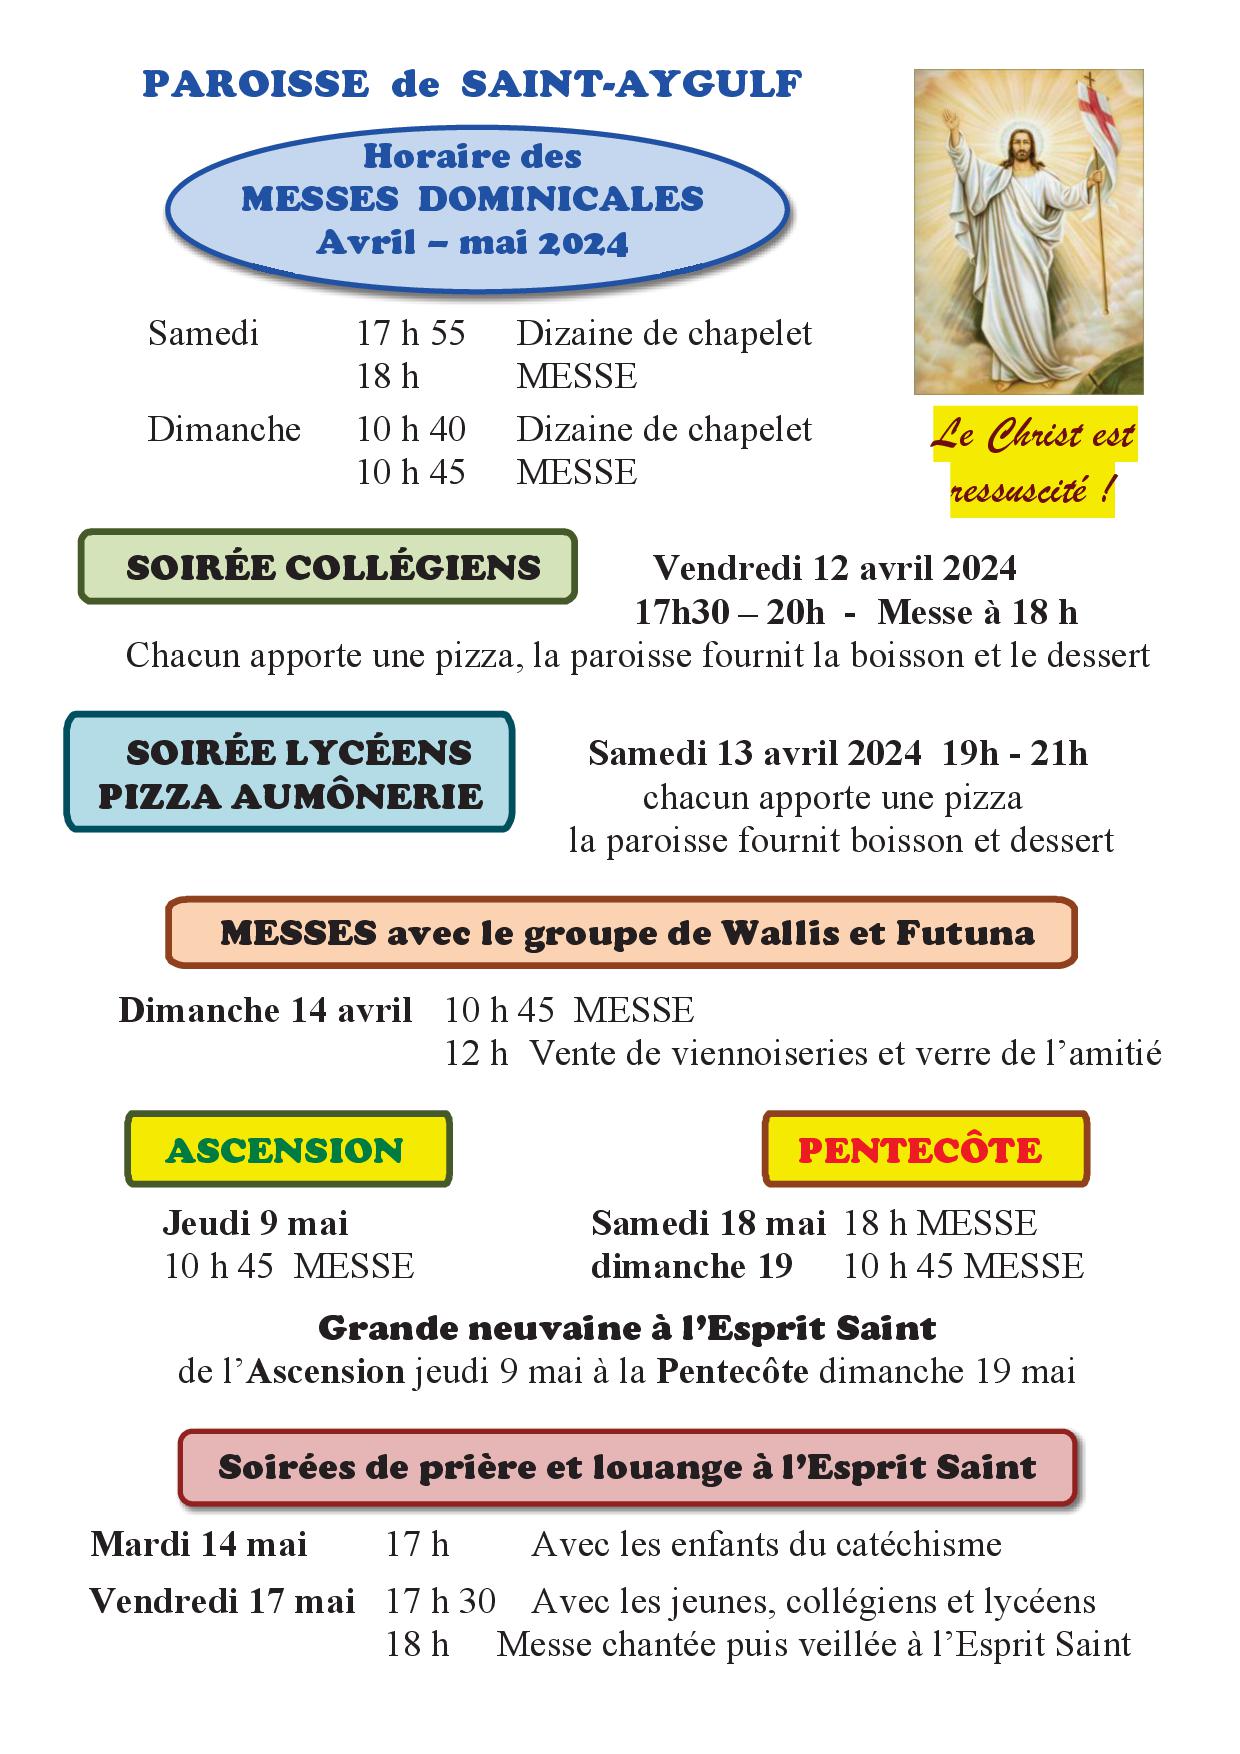 Horaires avril 20241